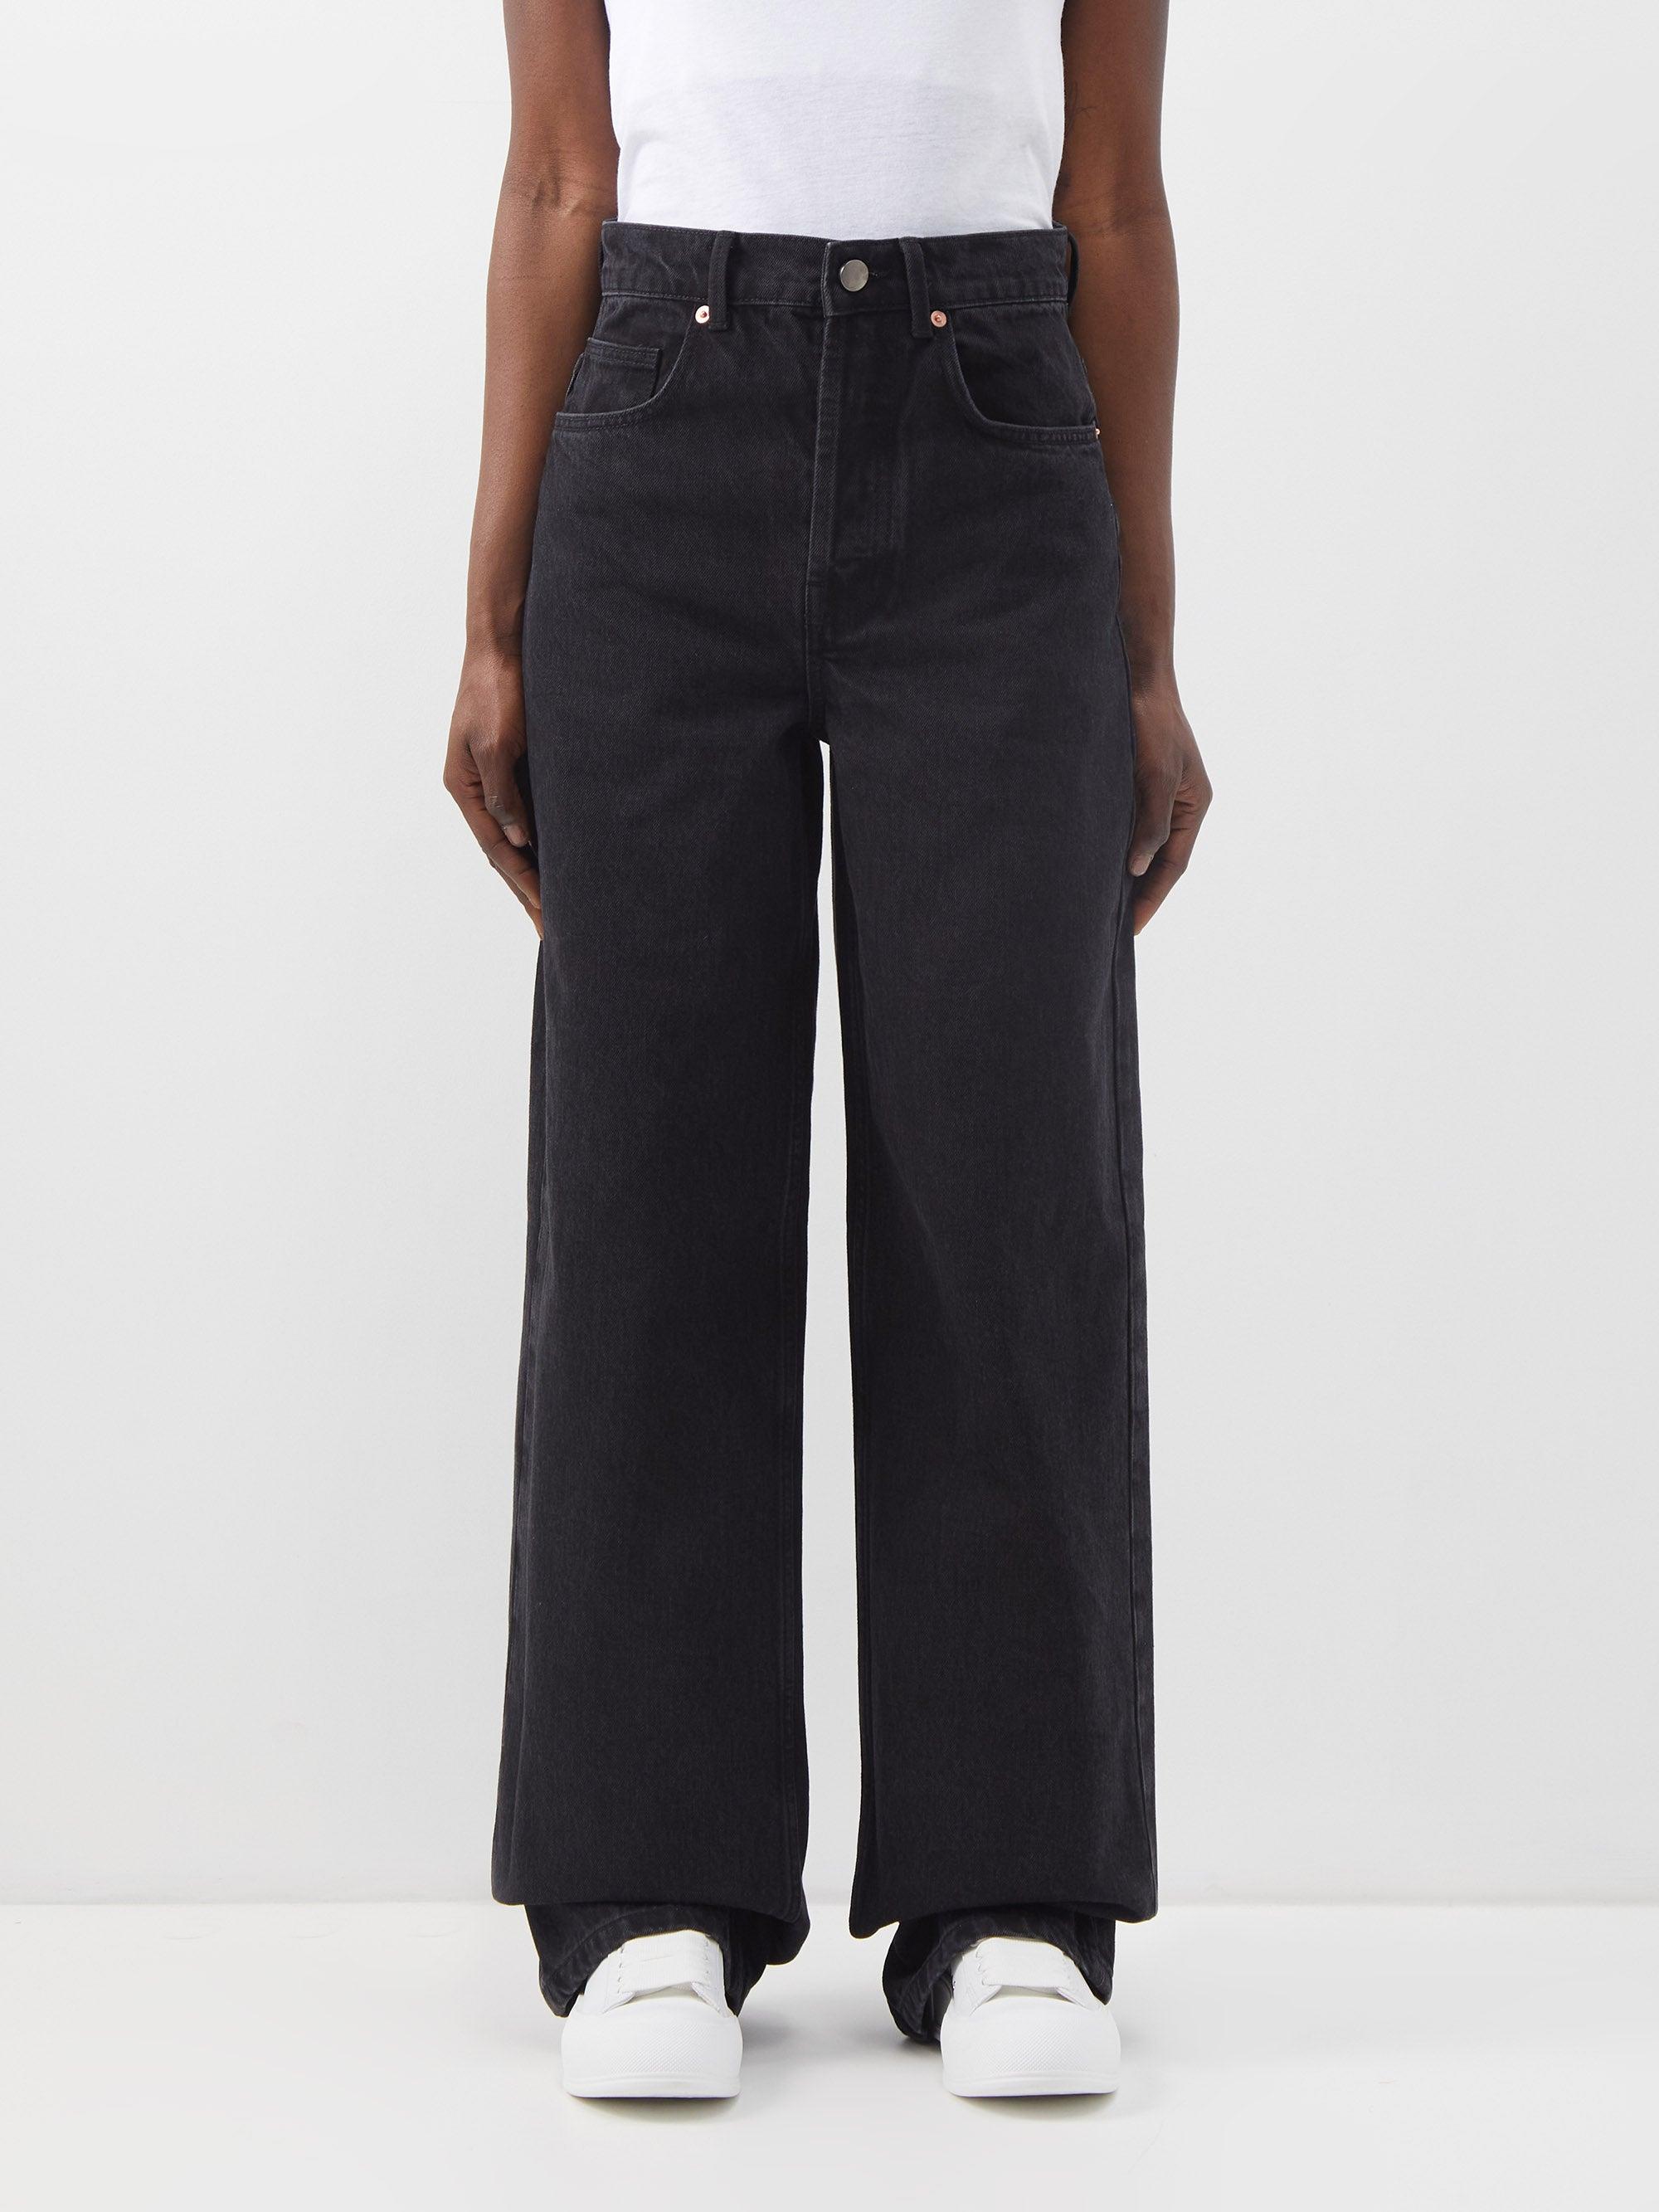 Raey 90s Organic-cotton High-waisted Wide-leg Jeans in Black | Lyst ...